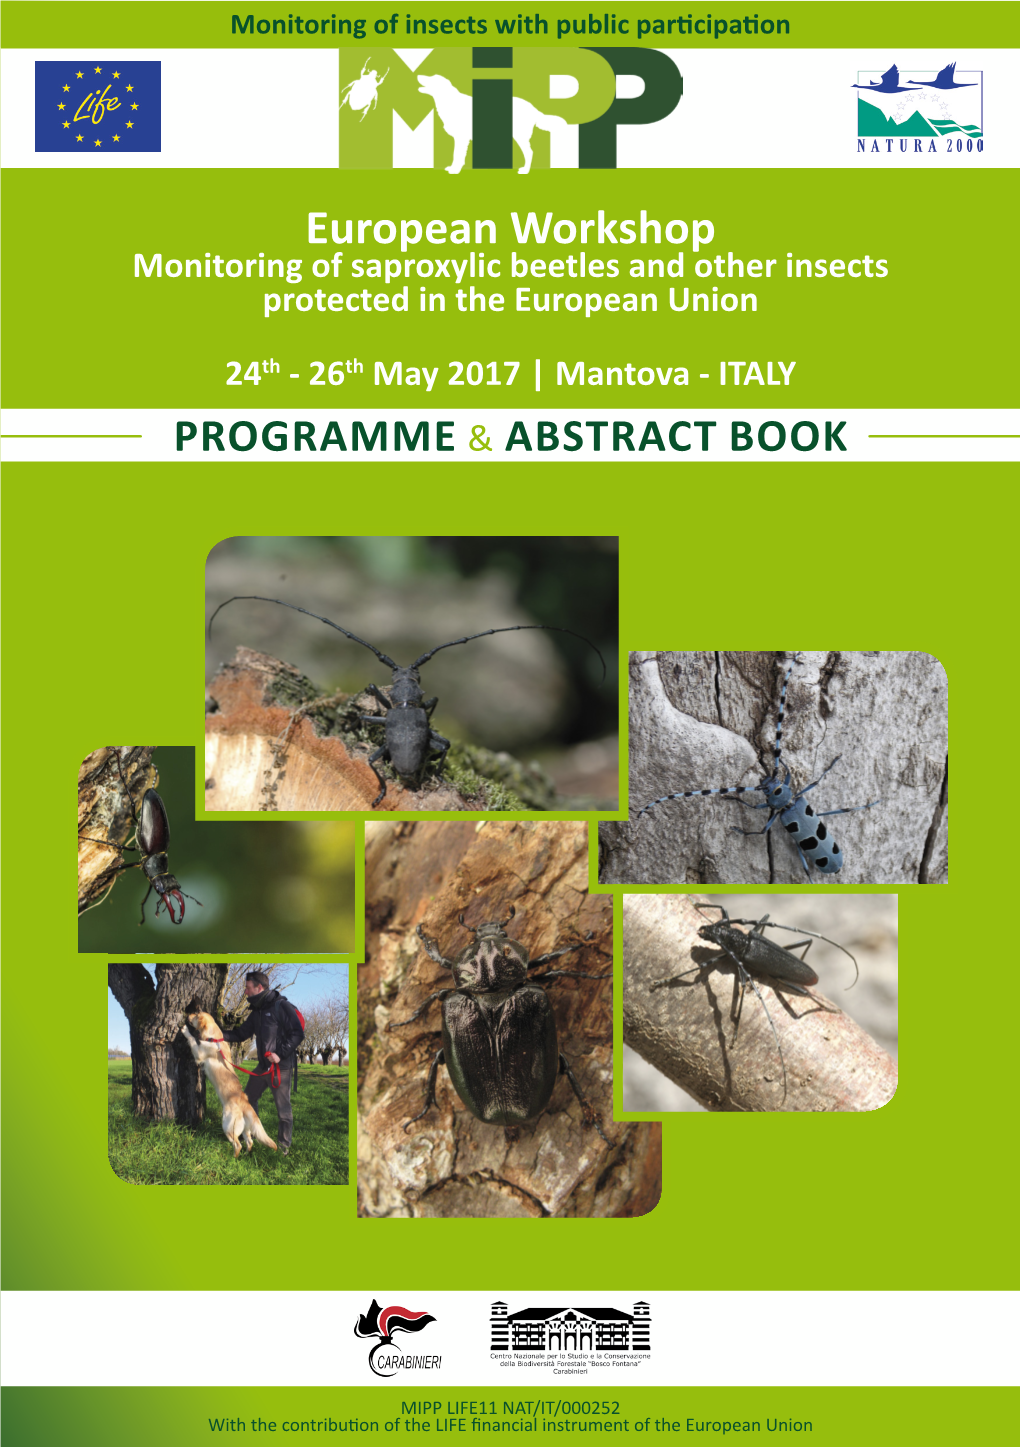 European Workshop Monitoring of Saproxylic Beetles and Other Insects Protected in the European Union